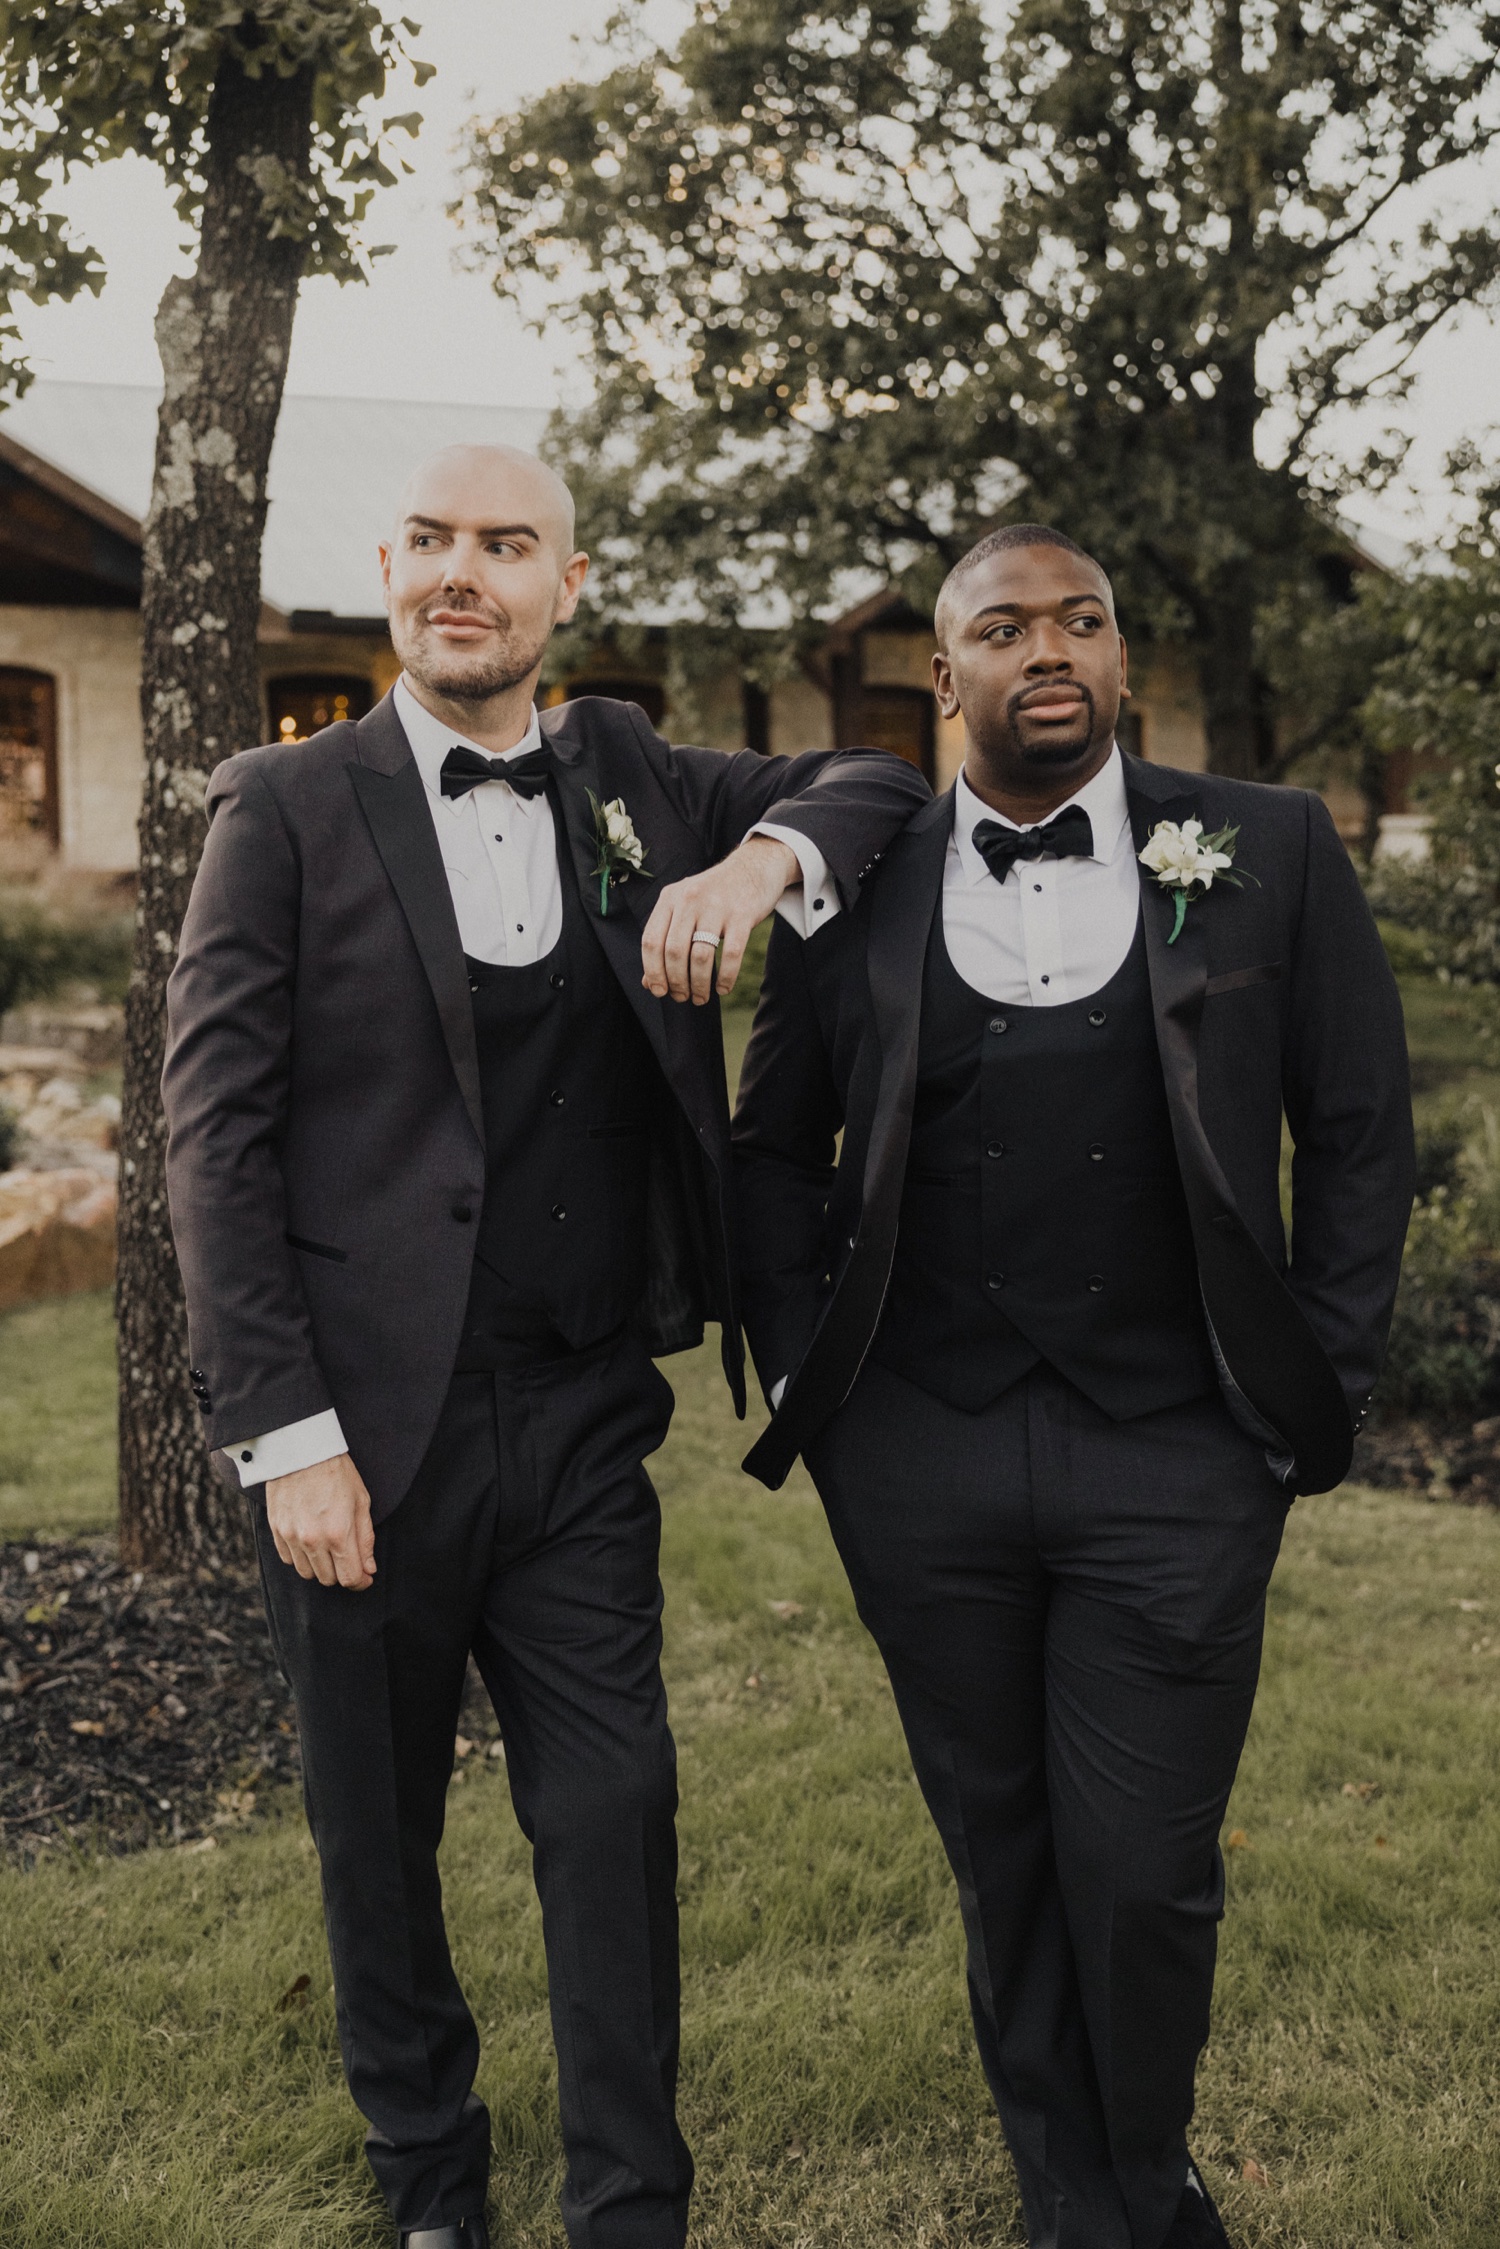 Two grooms in tuxedos posing at a wedding venue.